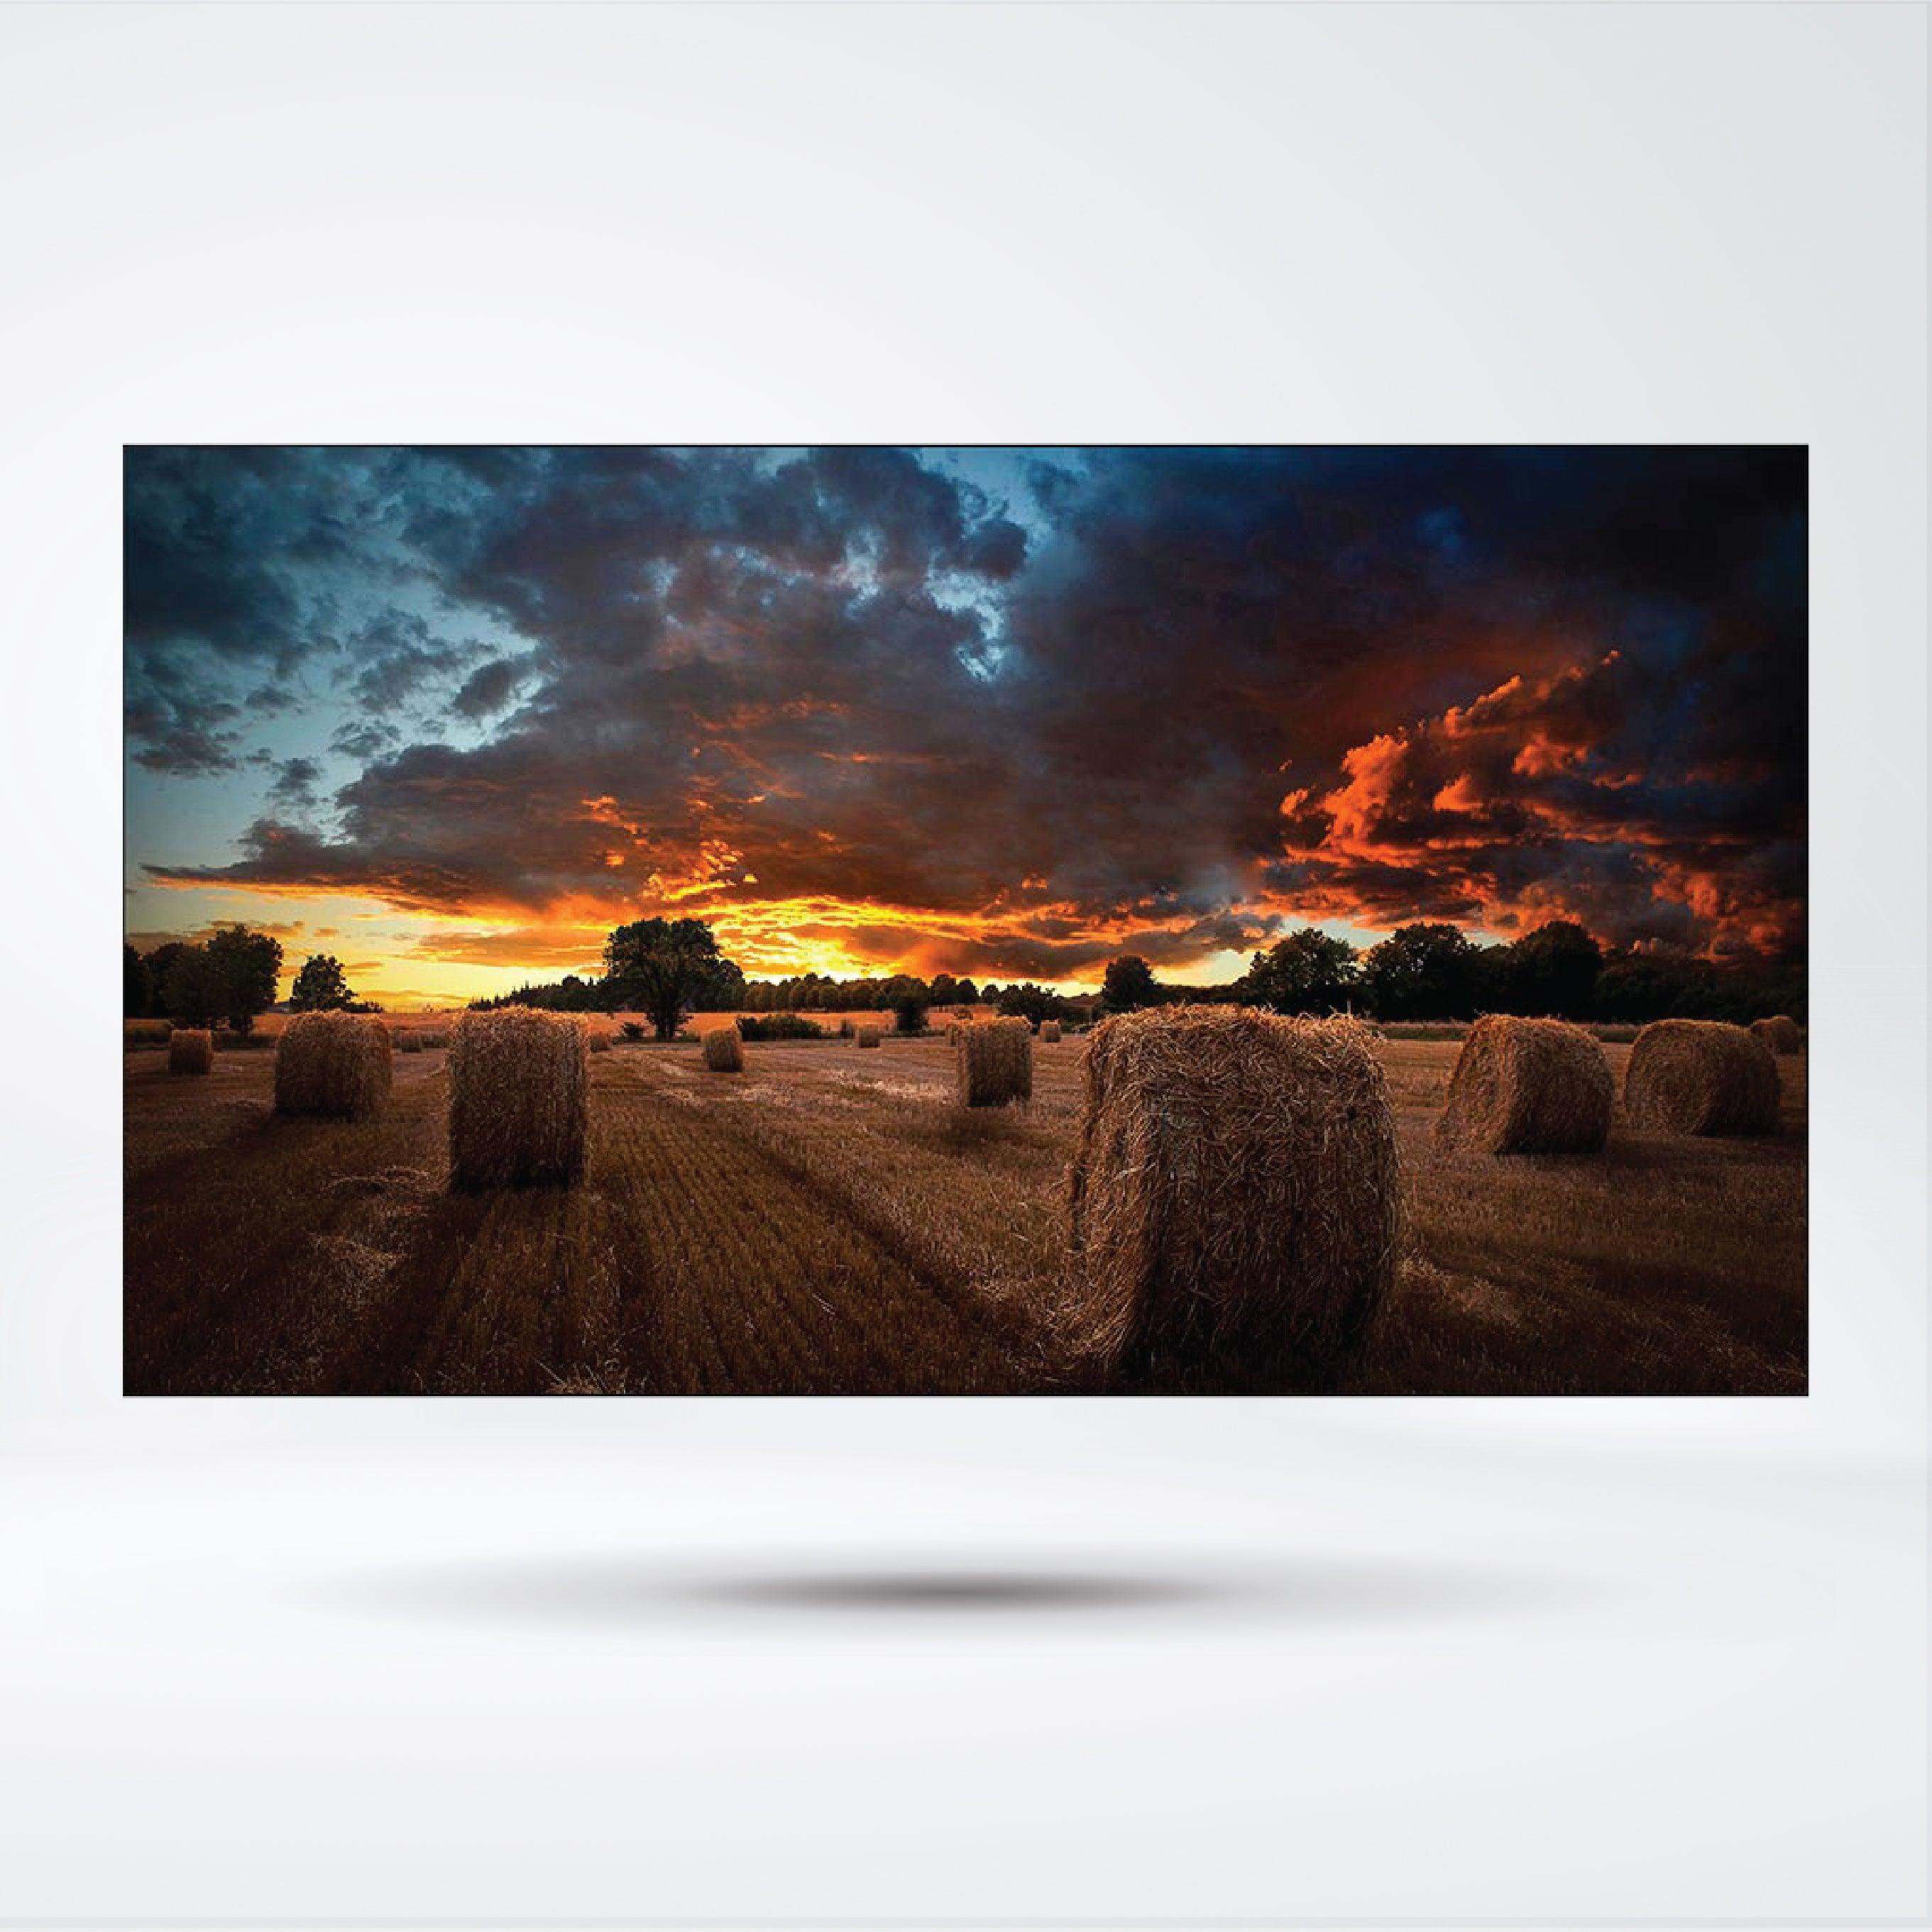 VM55T-U 55" Max 500 nit Always-on, space-saving solution delivering a seamless visual experience - Riverplus